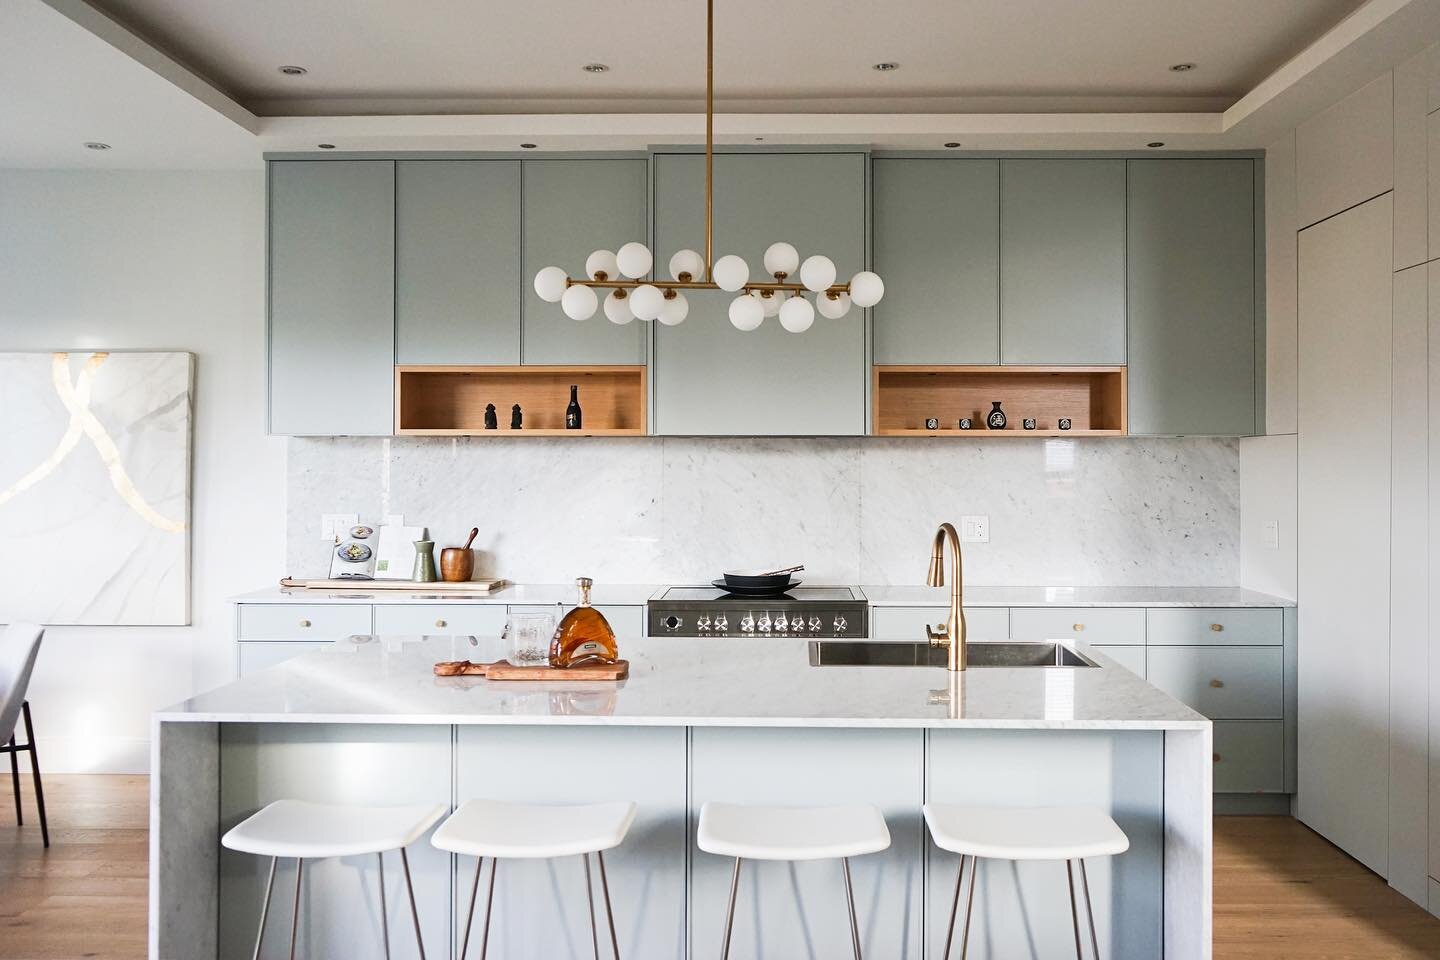 MINT
A modest palette of powdery light gray hues and relaxed mint gray. What kitchen colors in your dream home? 🧑&zwj;🍳 
⌂
⌂
⌂
#designbuild #architect #interiors #bhausliving #houses #mint #tiffanyandco #green #kitchen #interiordesign #luxuryhomes 